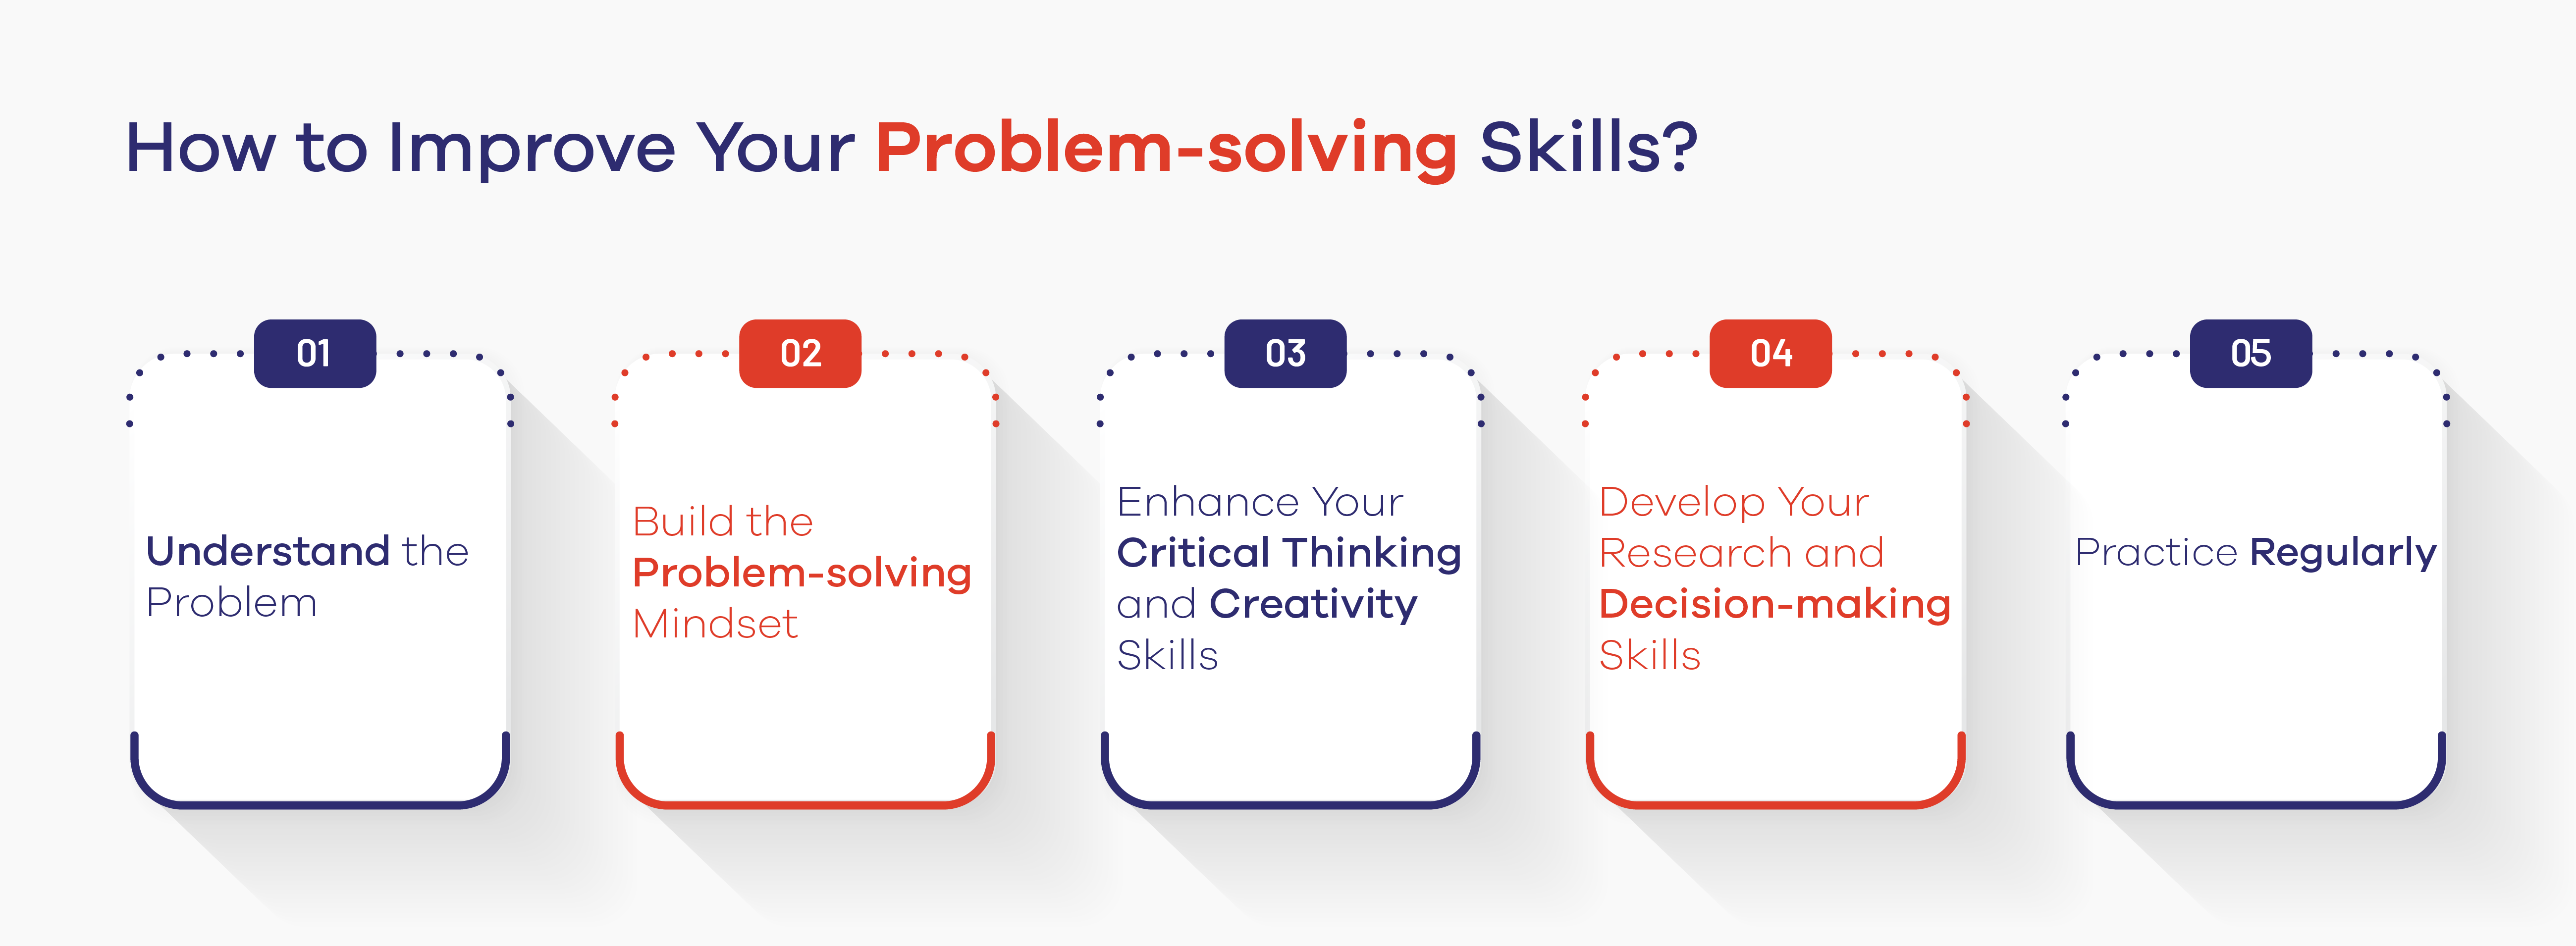 How to Improve Your Problem-solving Skills? 